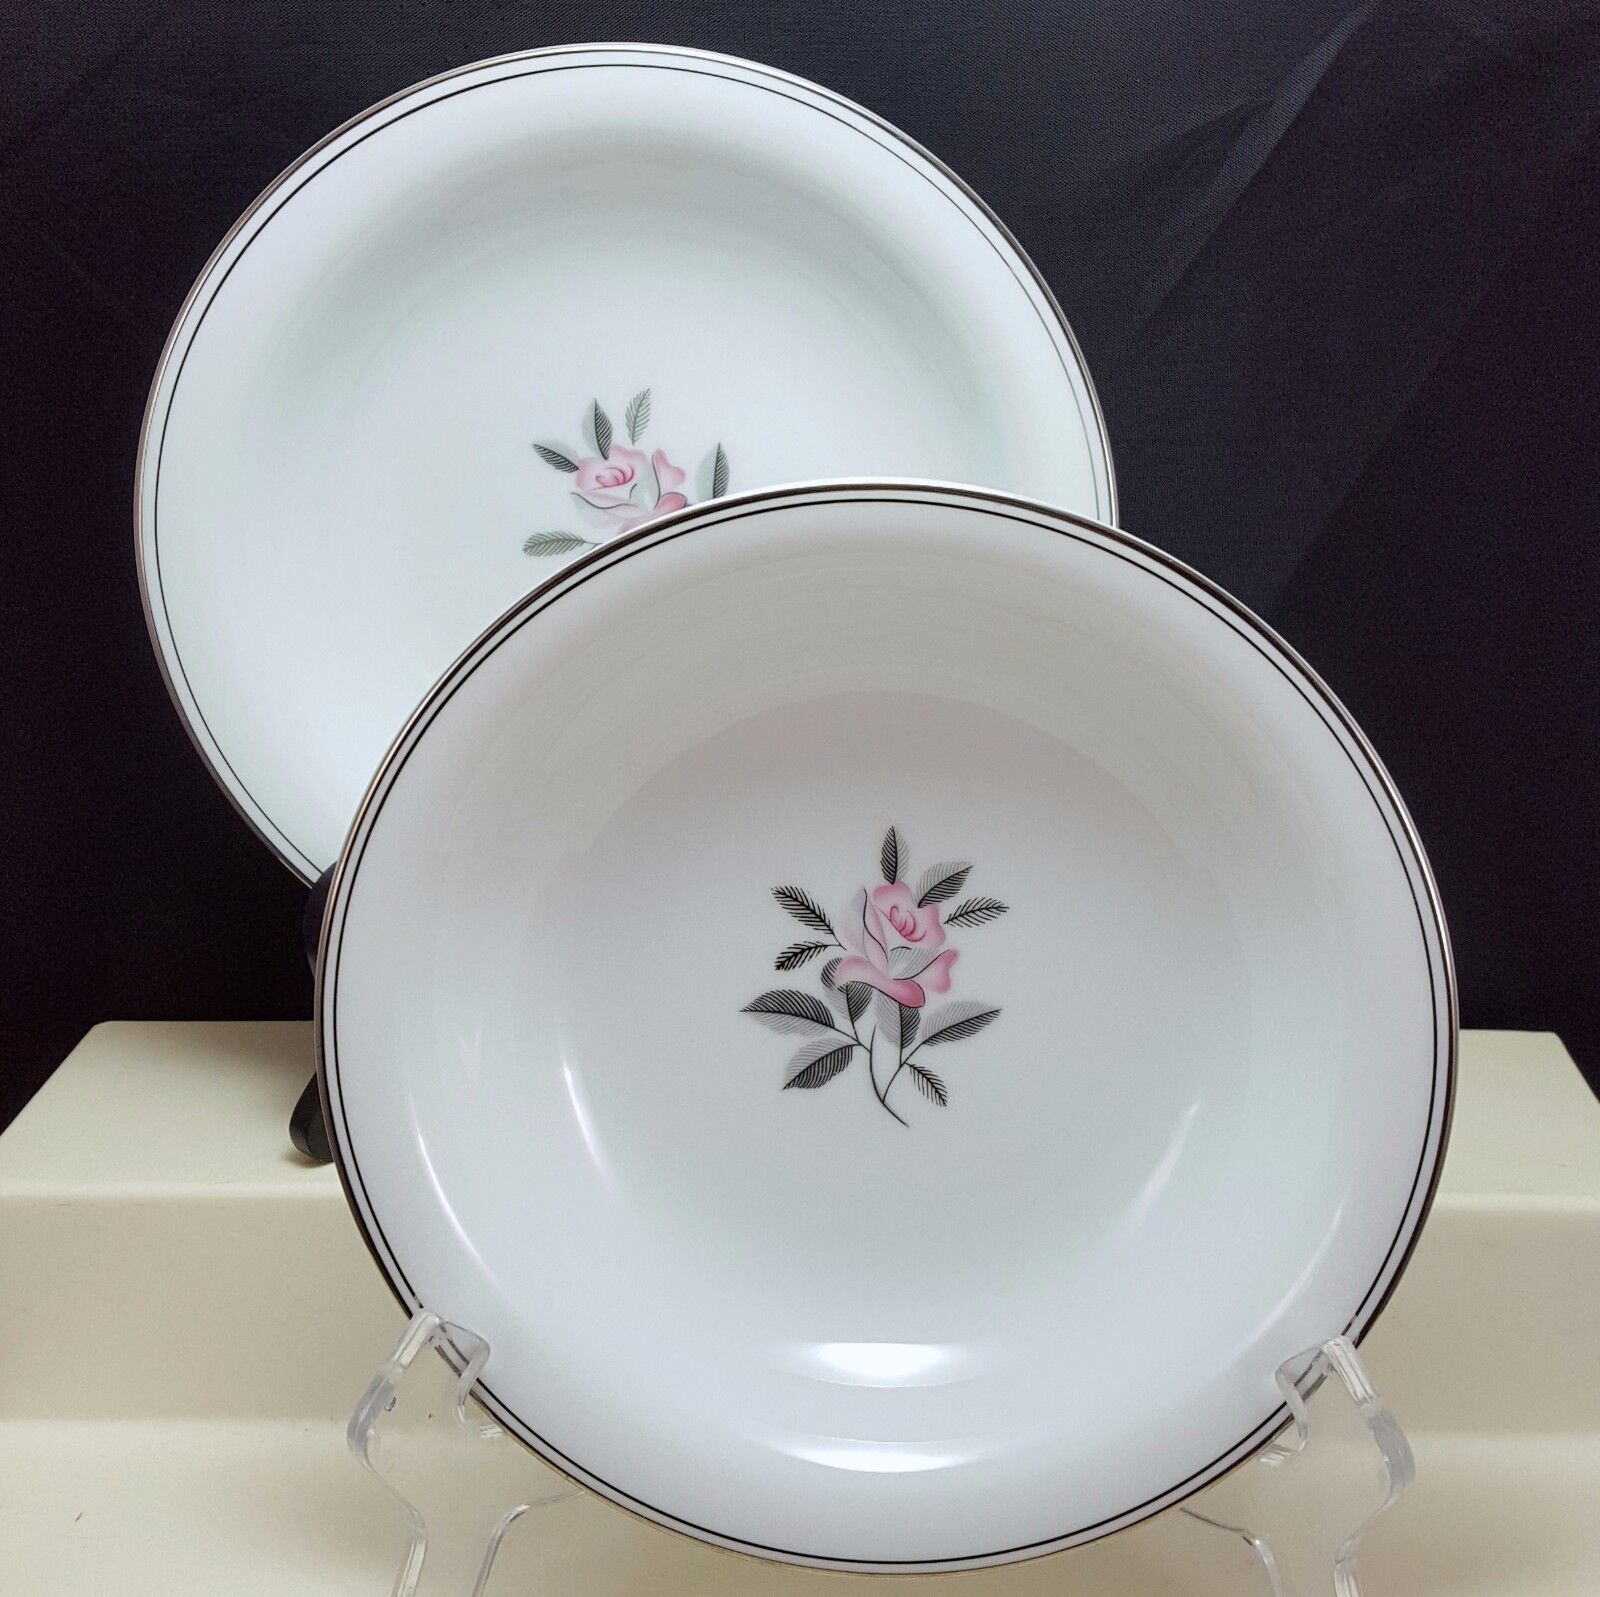 Primary image for Noritake Rosales Soup Bowls 7.5in Set of 2 White Pink Rose  Cereal 5790 